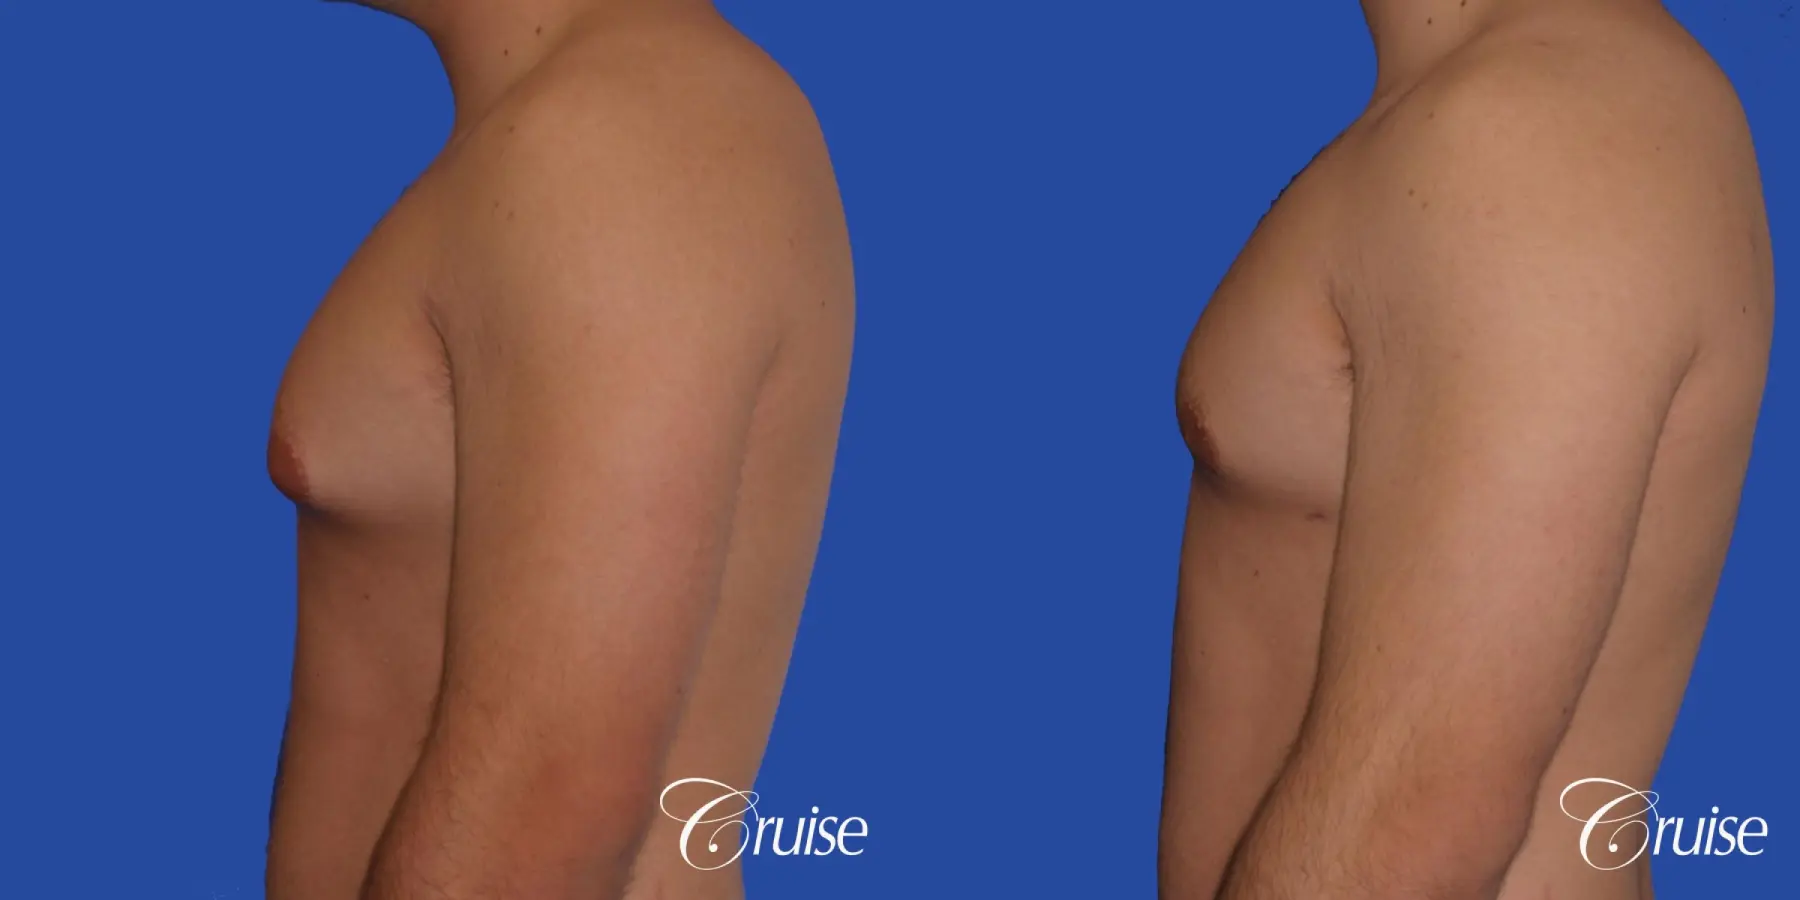 mild case of gynecomastia on adult - Before and After 2